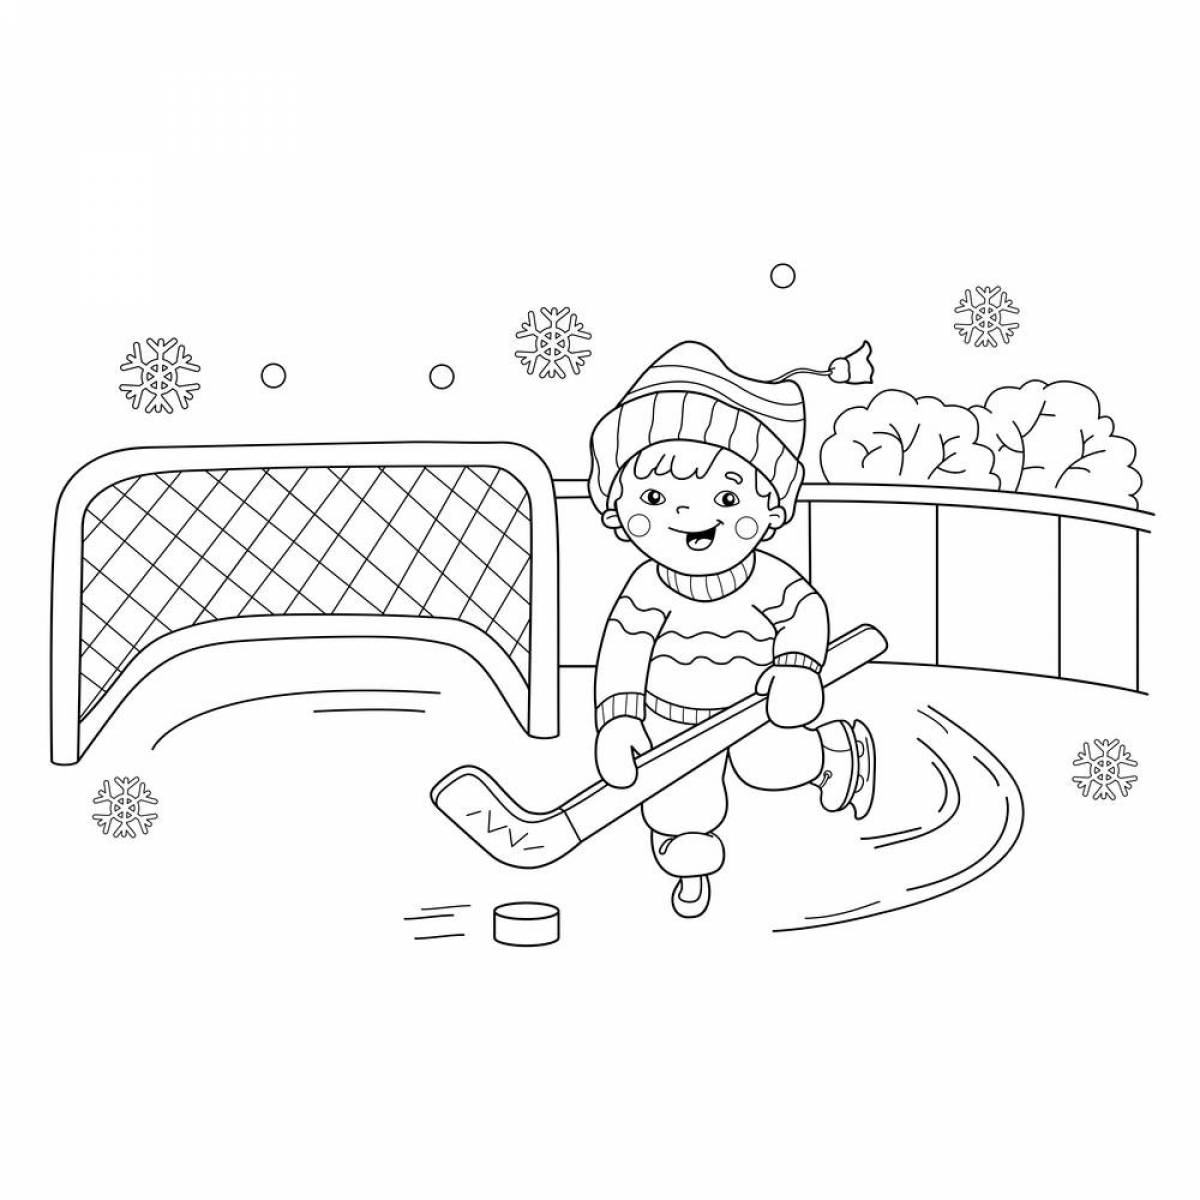 Great winter sports coloring book for 6-7 year olds